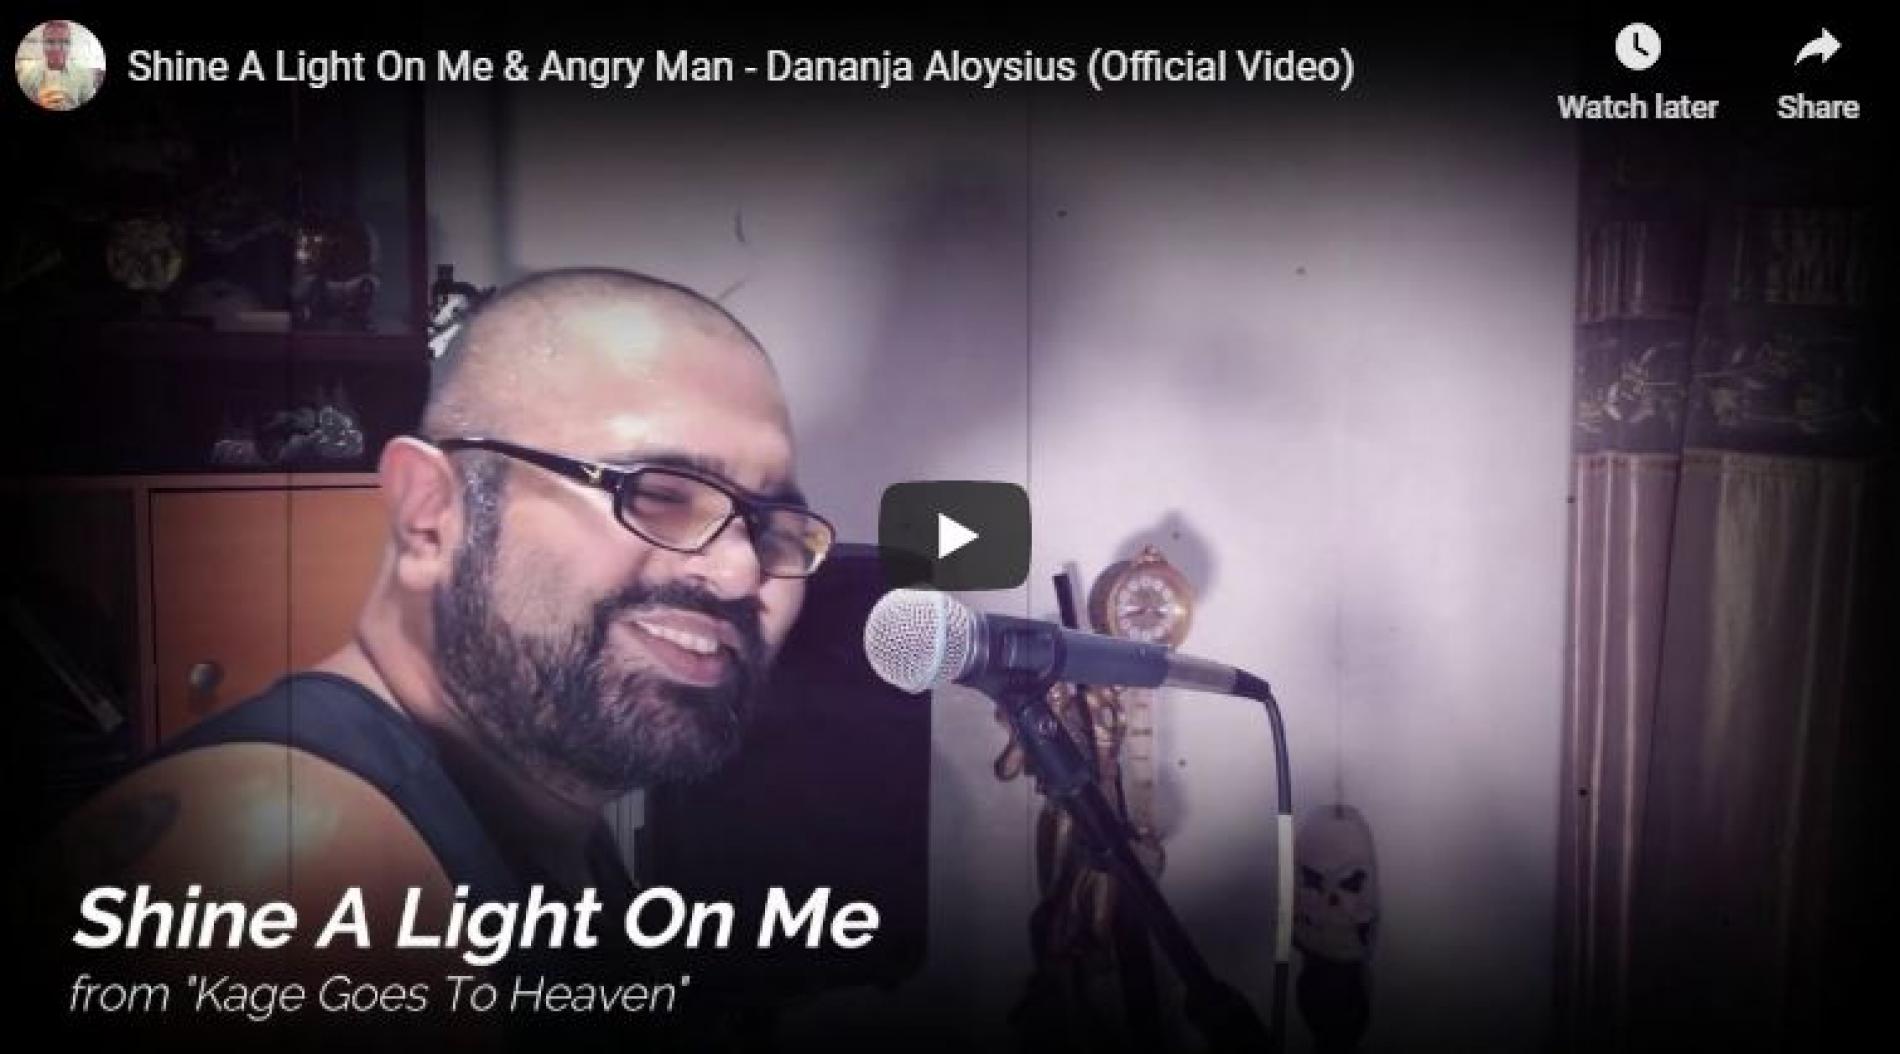 Dananja Aloysius – Shine A Light On Me & Angry Man (Official Video)